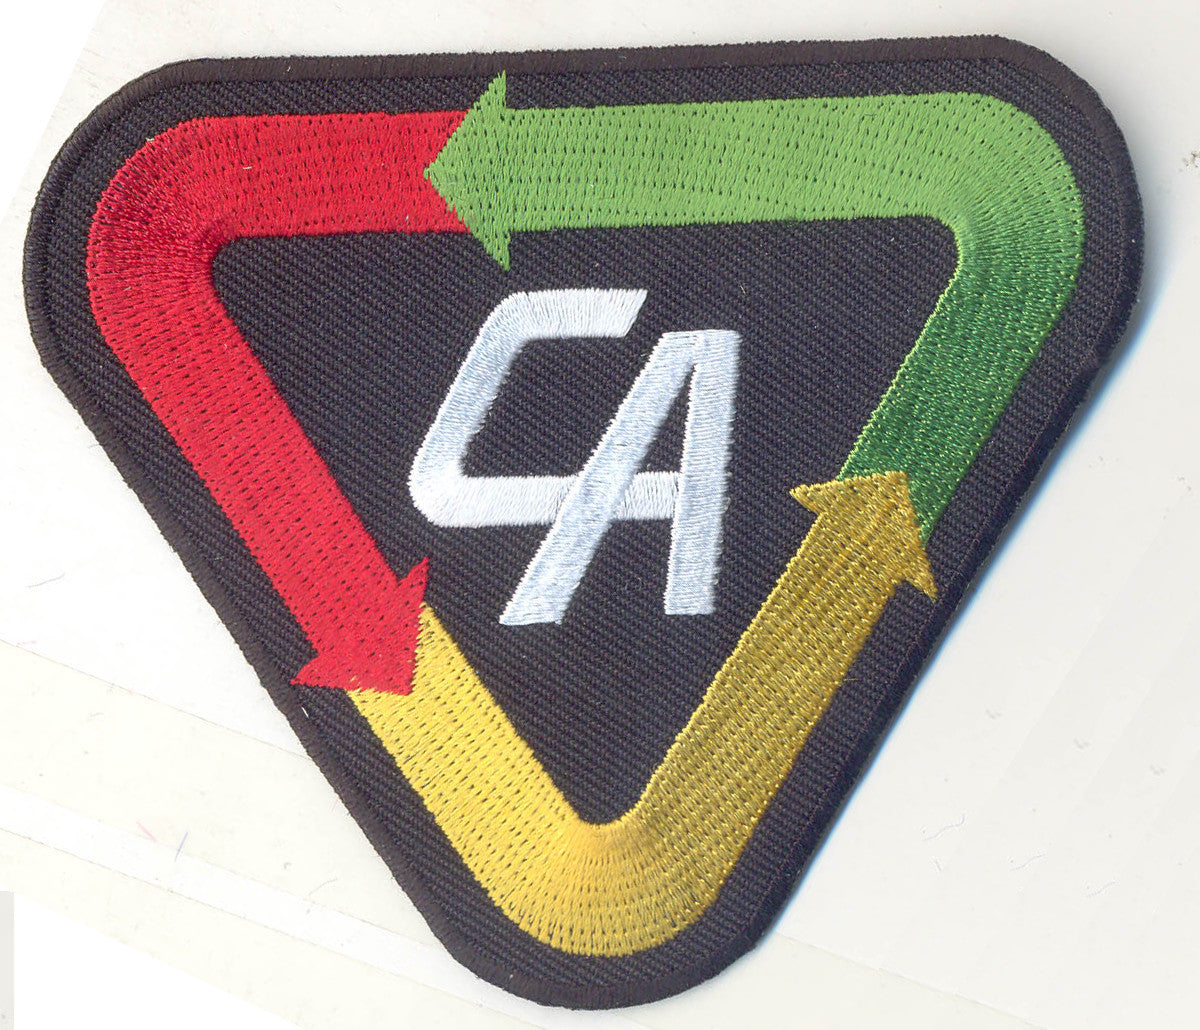 A390 Captain Action custom licensed patch full sized multi-colored plastic backed!